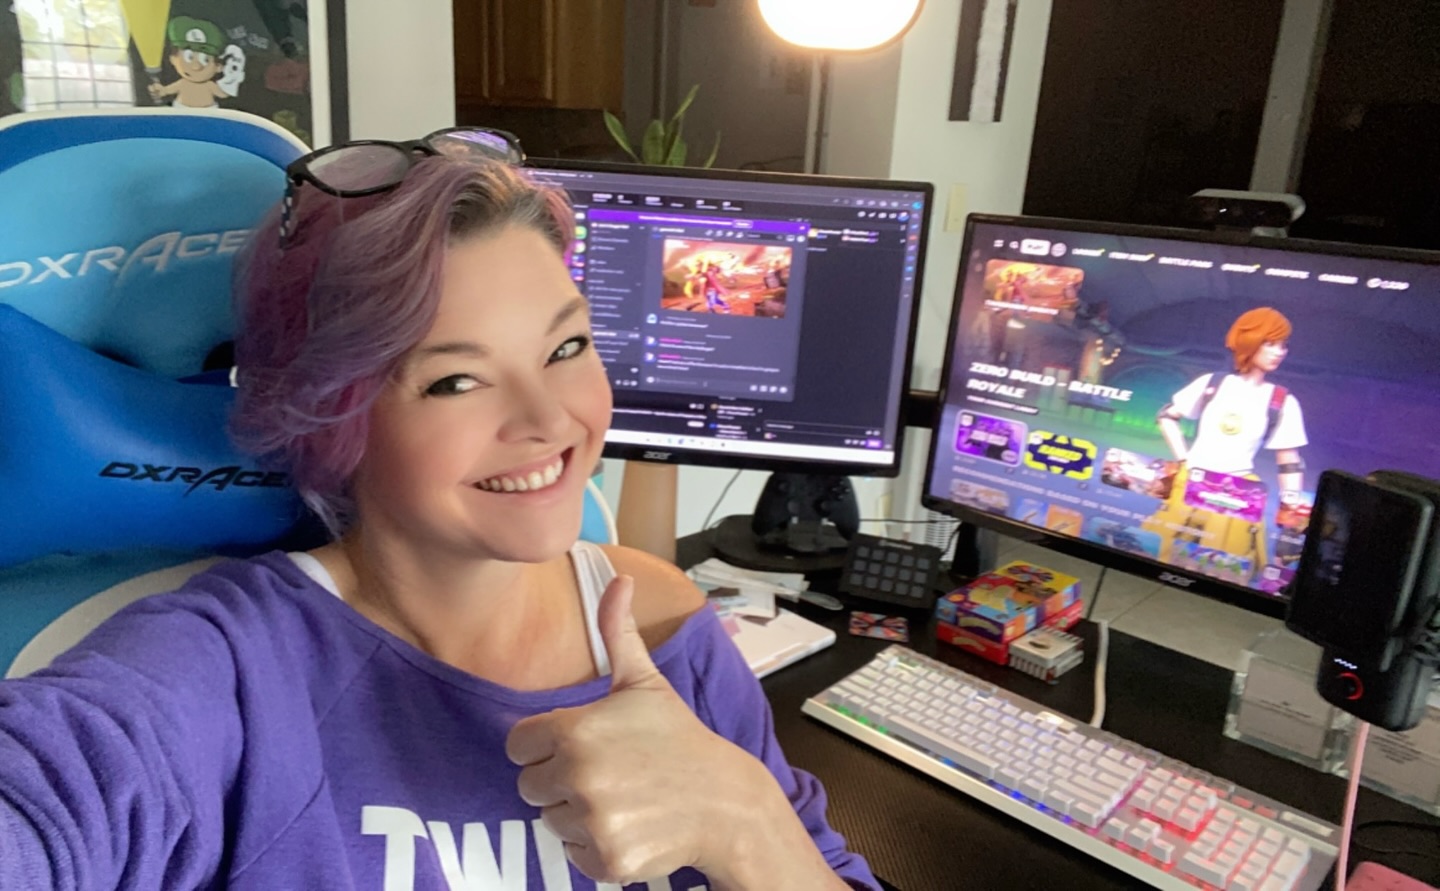 It’s time for my Twitch live stream!! Twitch.tv/jaxboxchick starting now and going until at least 6 pm Florida time!

Playing Fortnite, drinking fireball, and having fun. Let’s goooo!!